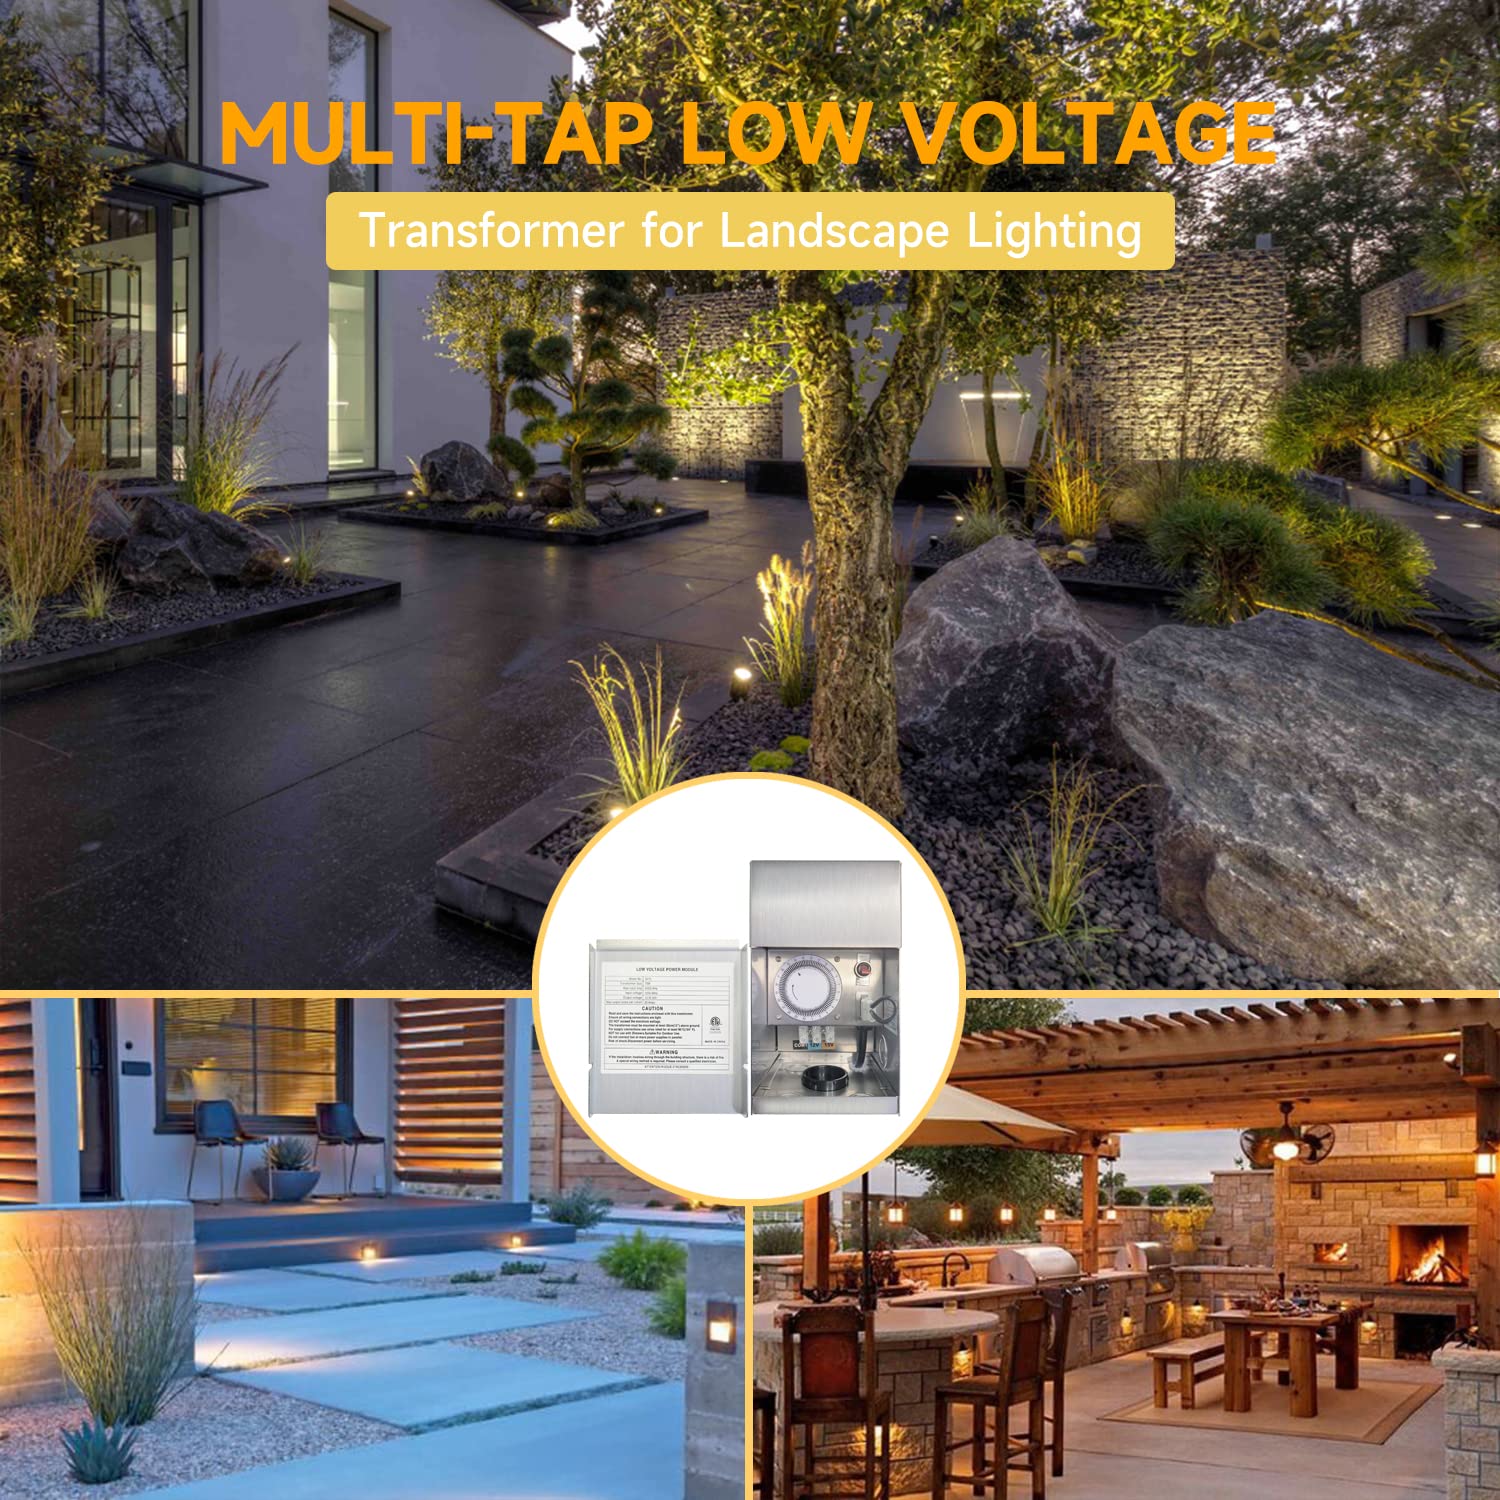 75W multi-tap low voltage transformer for outdoor landscape lighting showcased in various settings